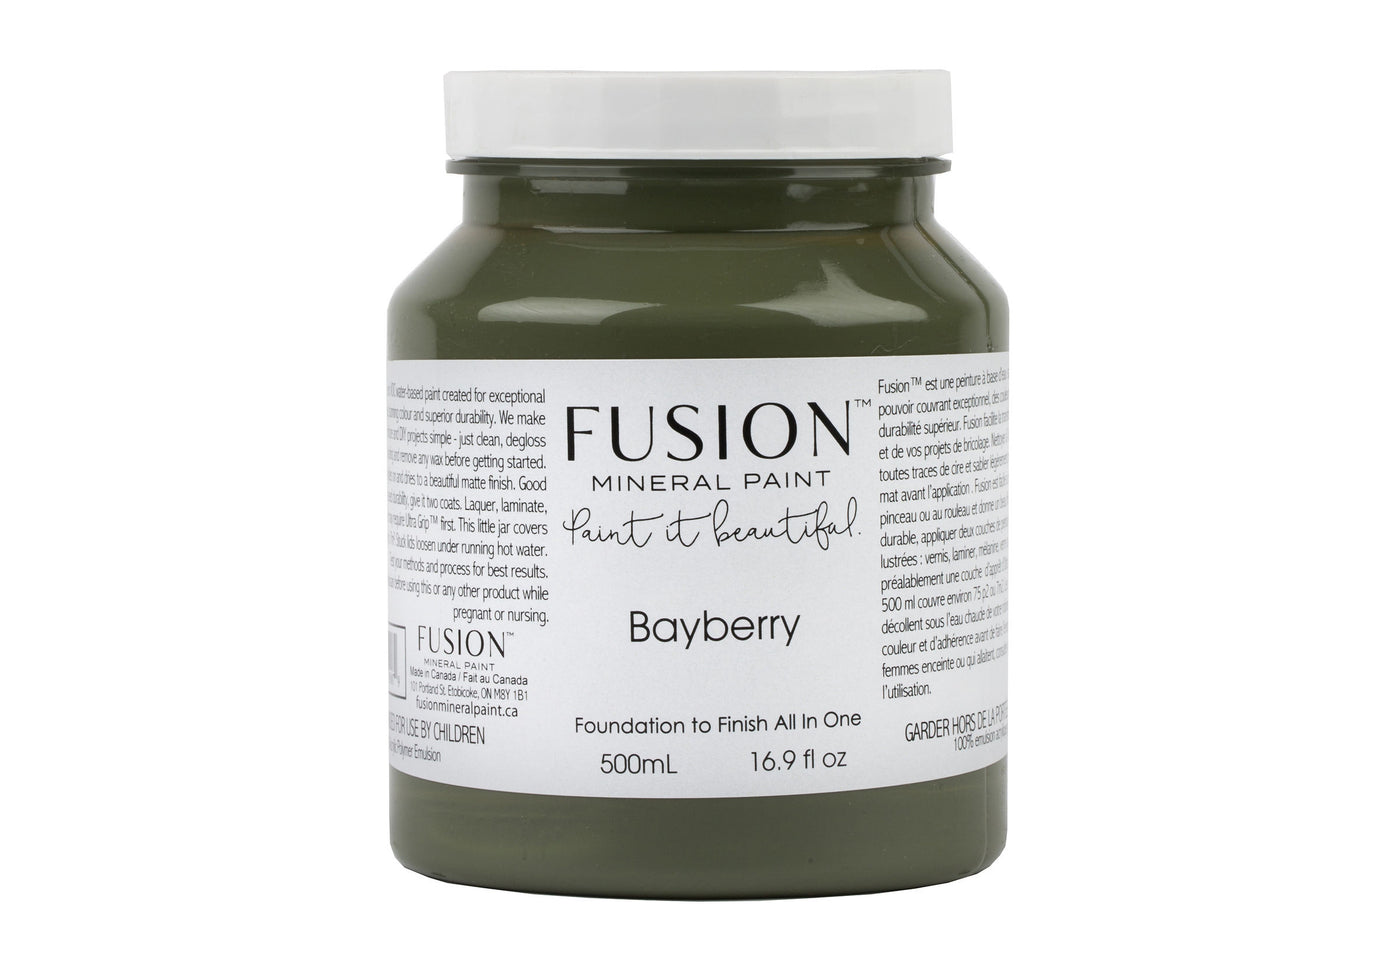 Deep muted olive green 500ml pint from Fusion Mineral Paint